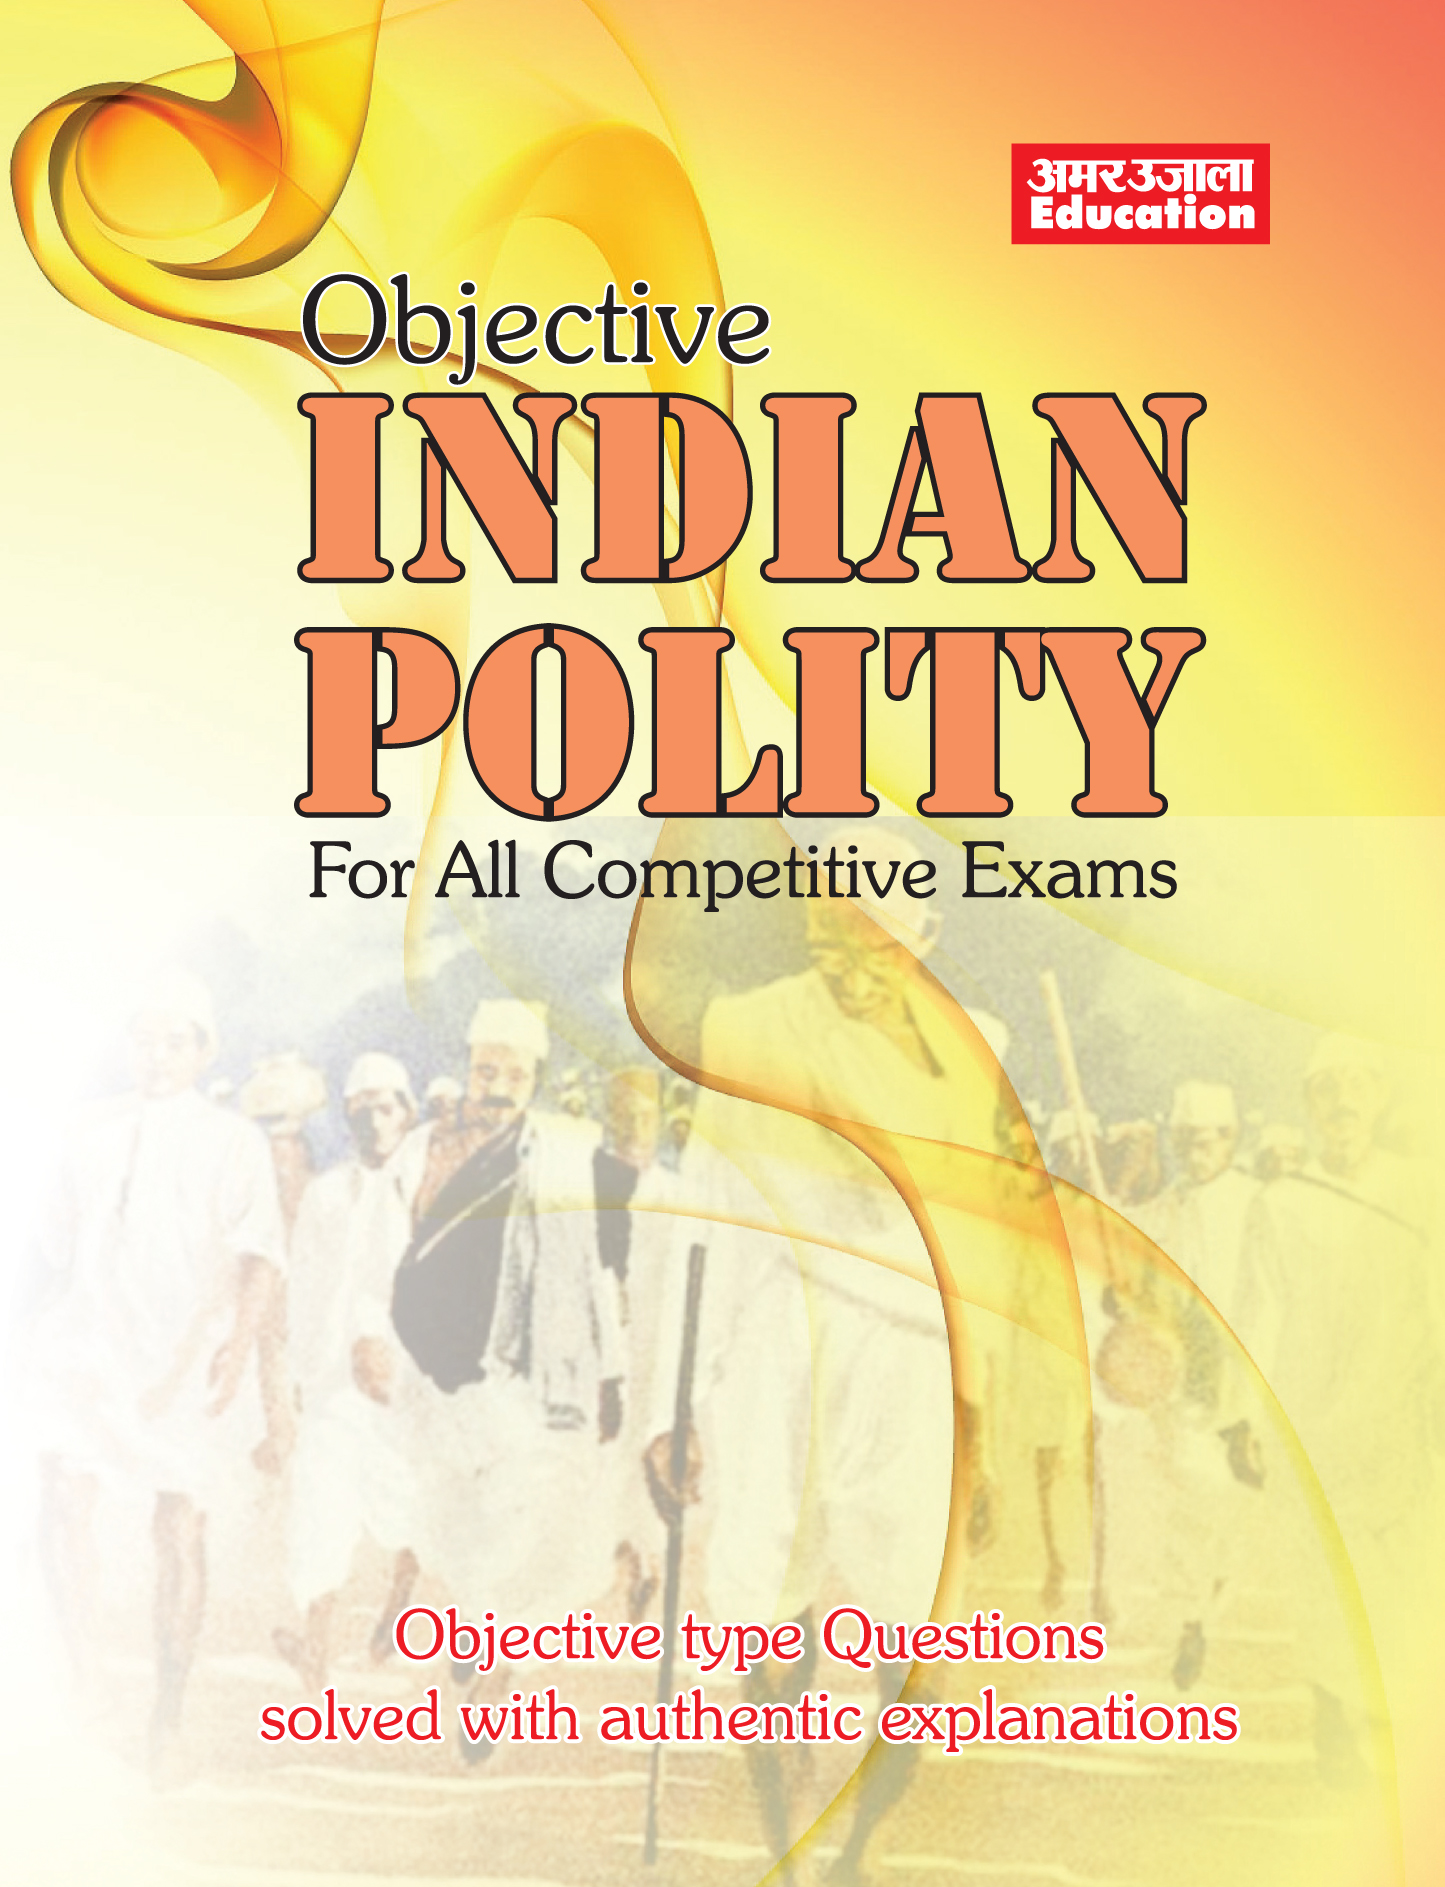 NCERT Objective Indian Polity (English)